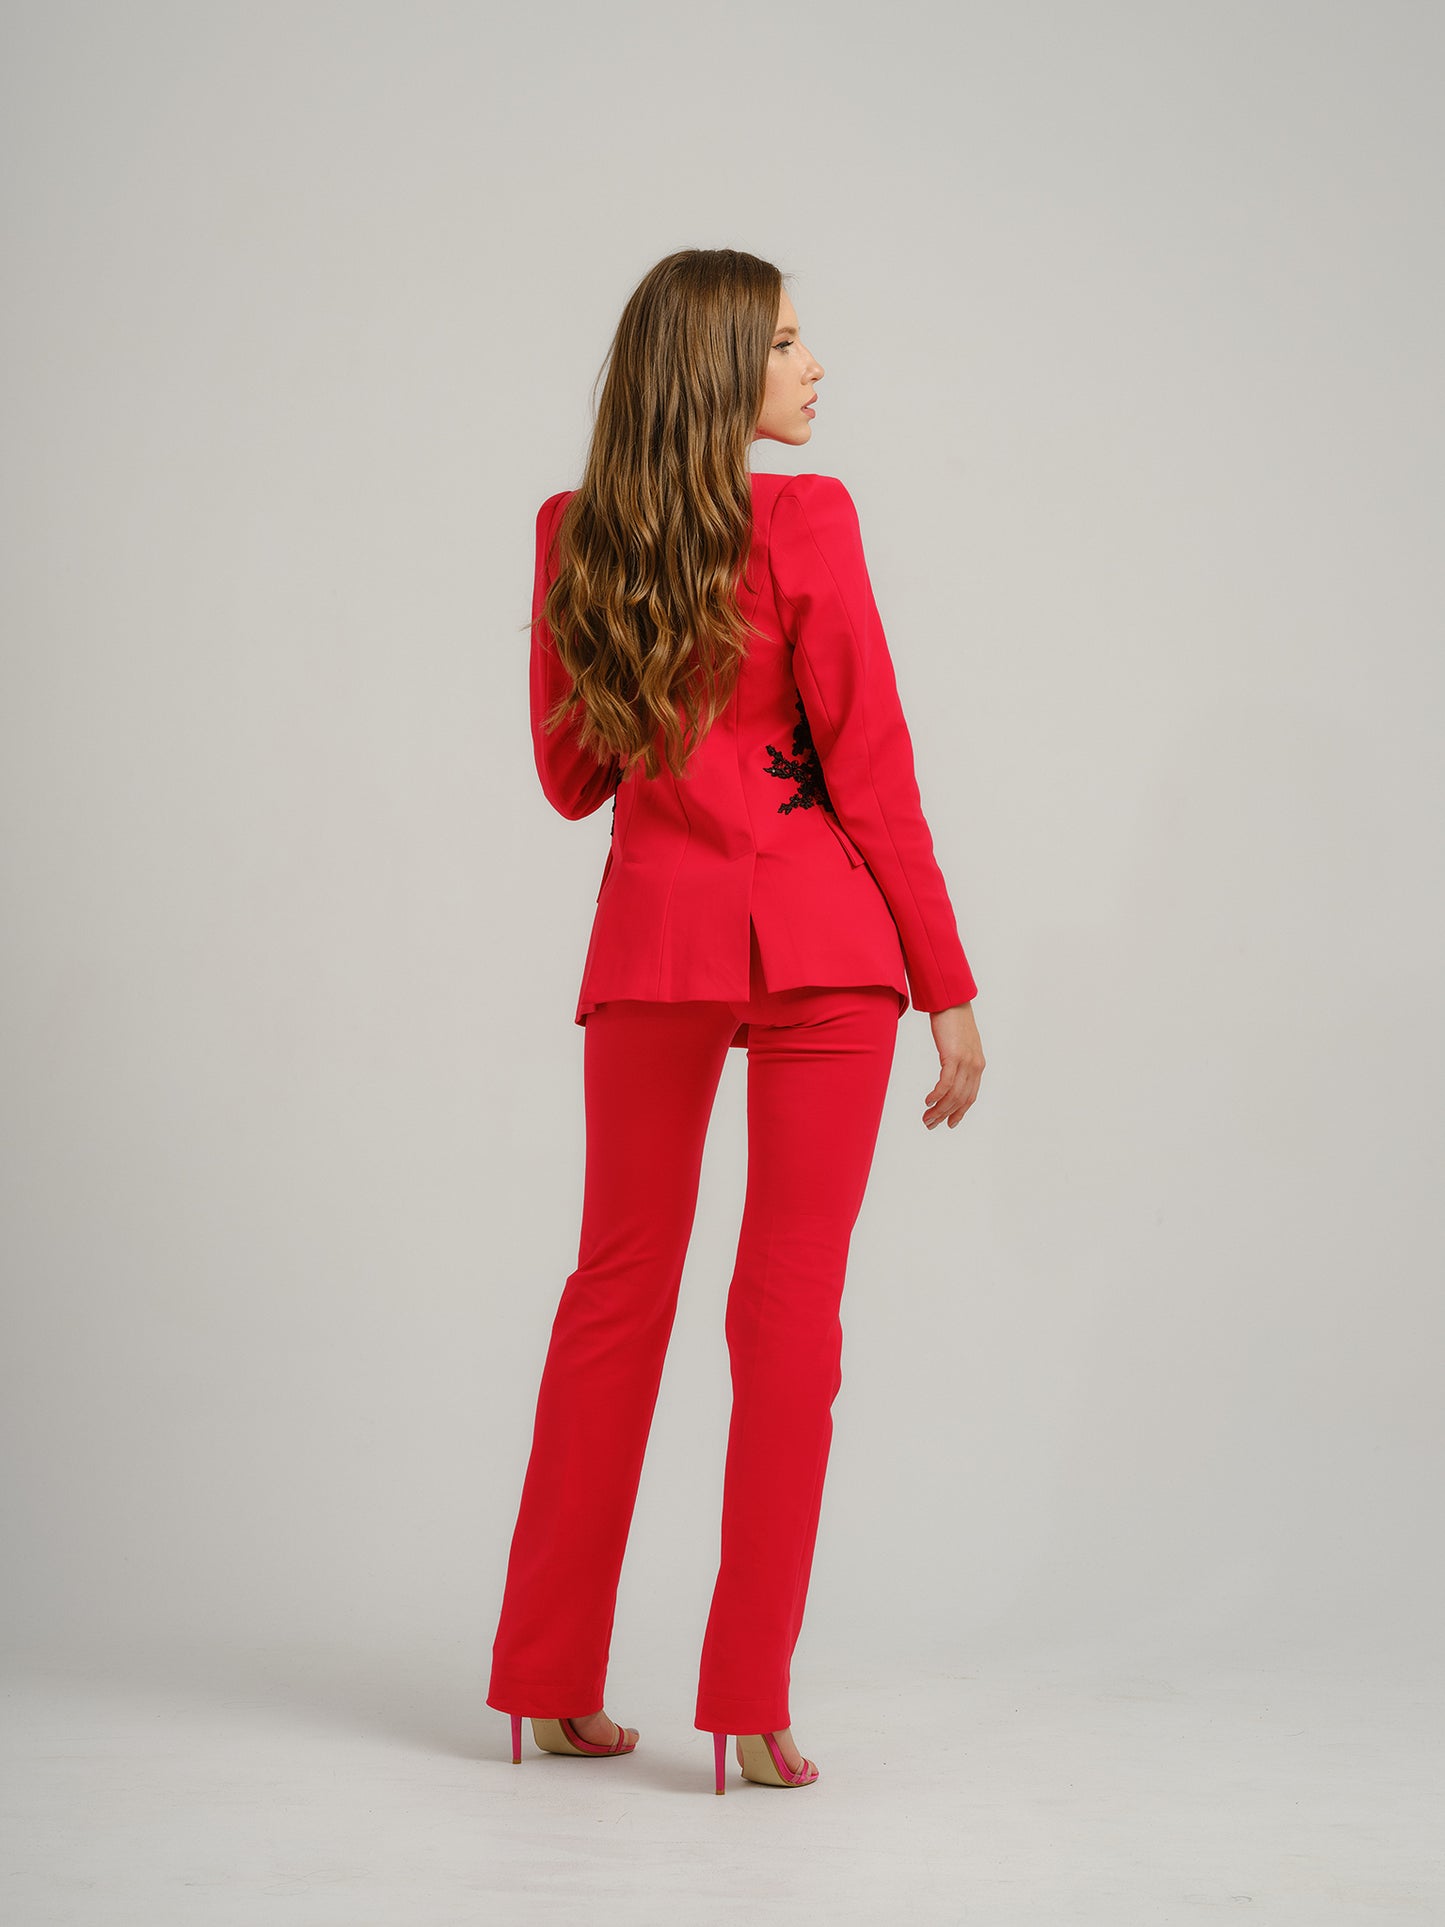 Fantasy Fitted Blazer With Embroidery - Red by Tia Dorraine Women's Luxury Fashion Designer Clothing Brand